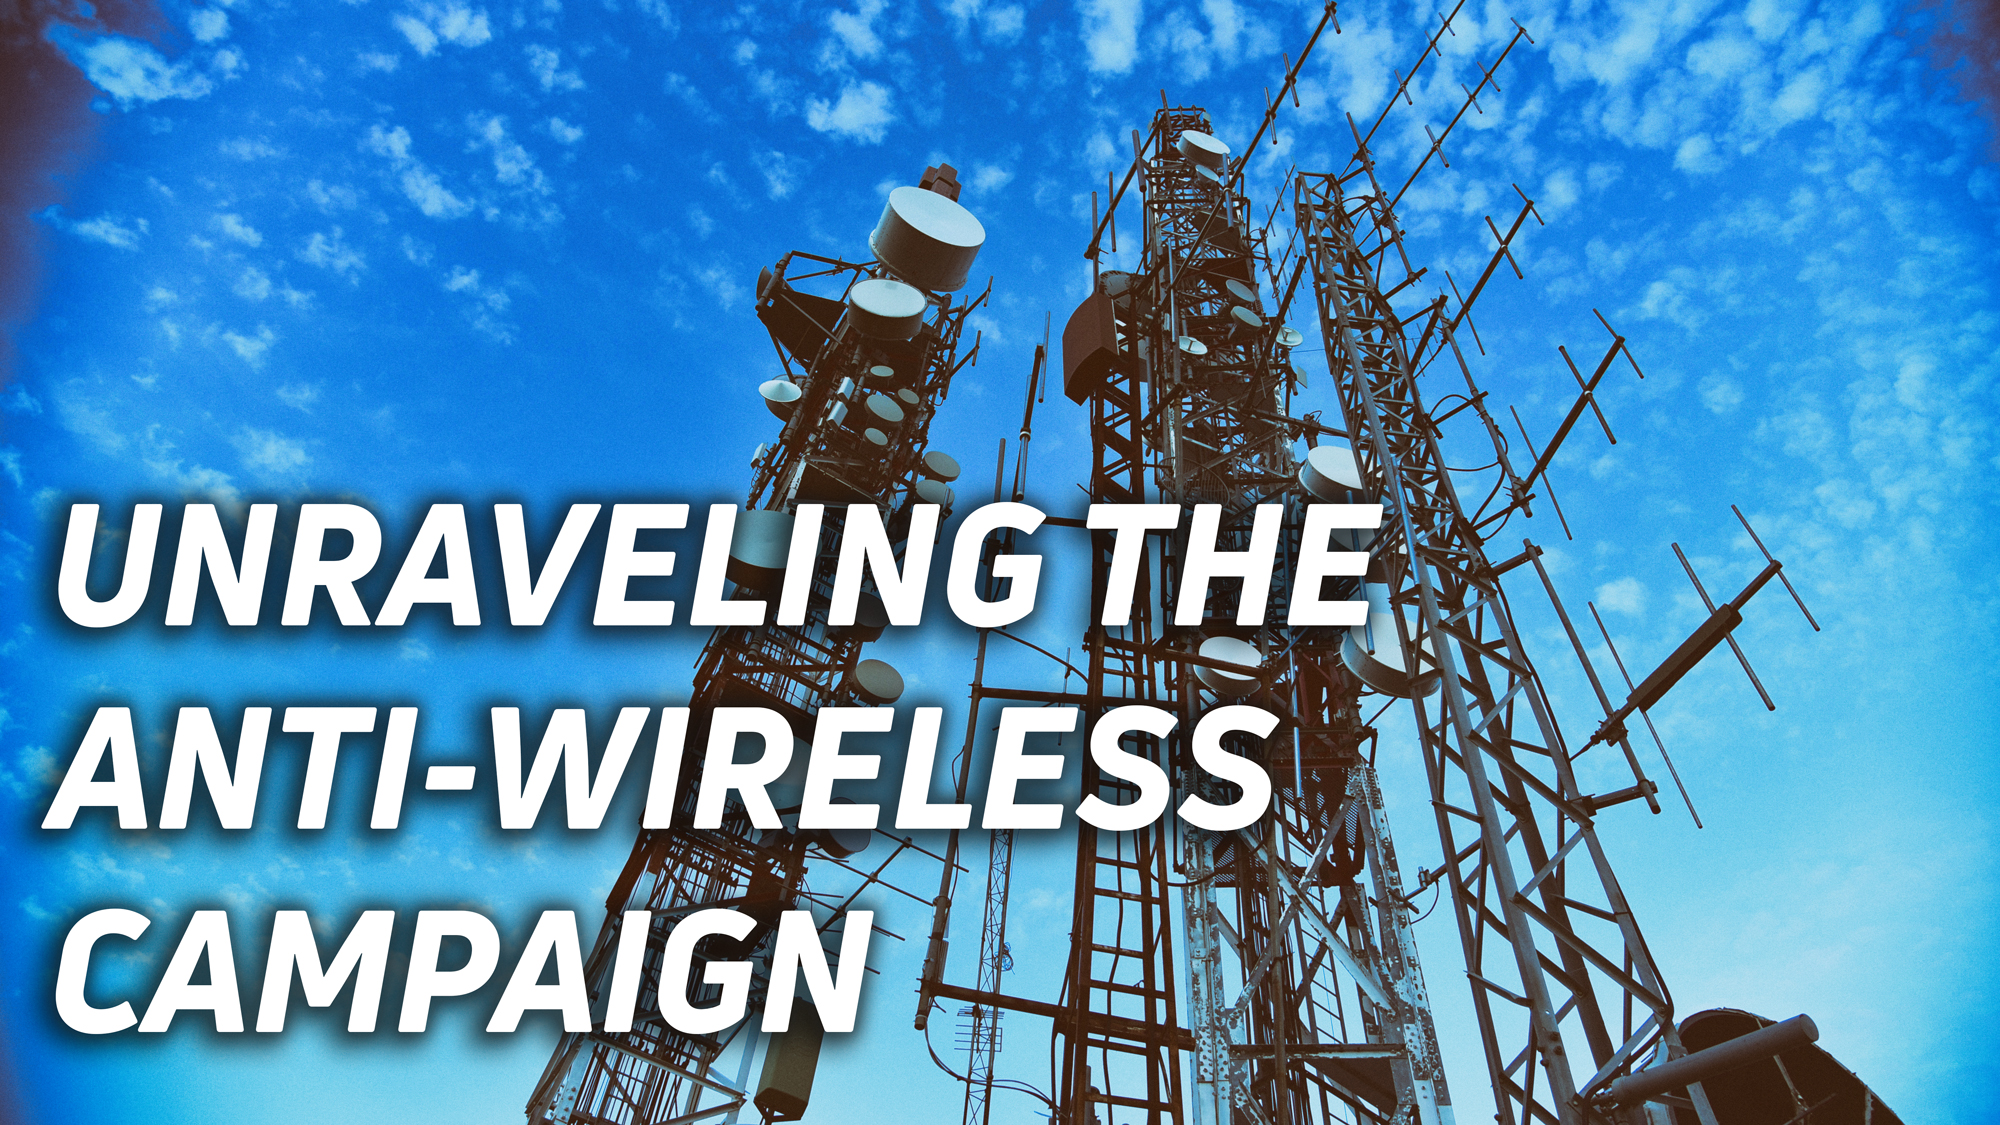 A photo of a cell tower with the text "unraveling the anti-wireless campaign" over it.